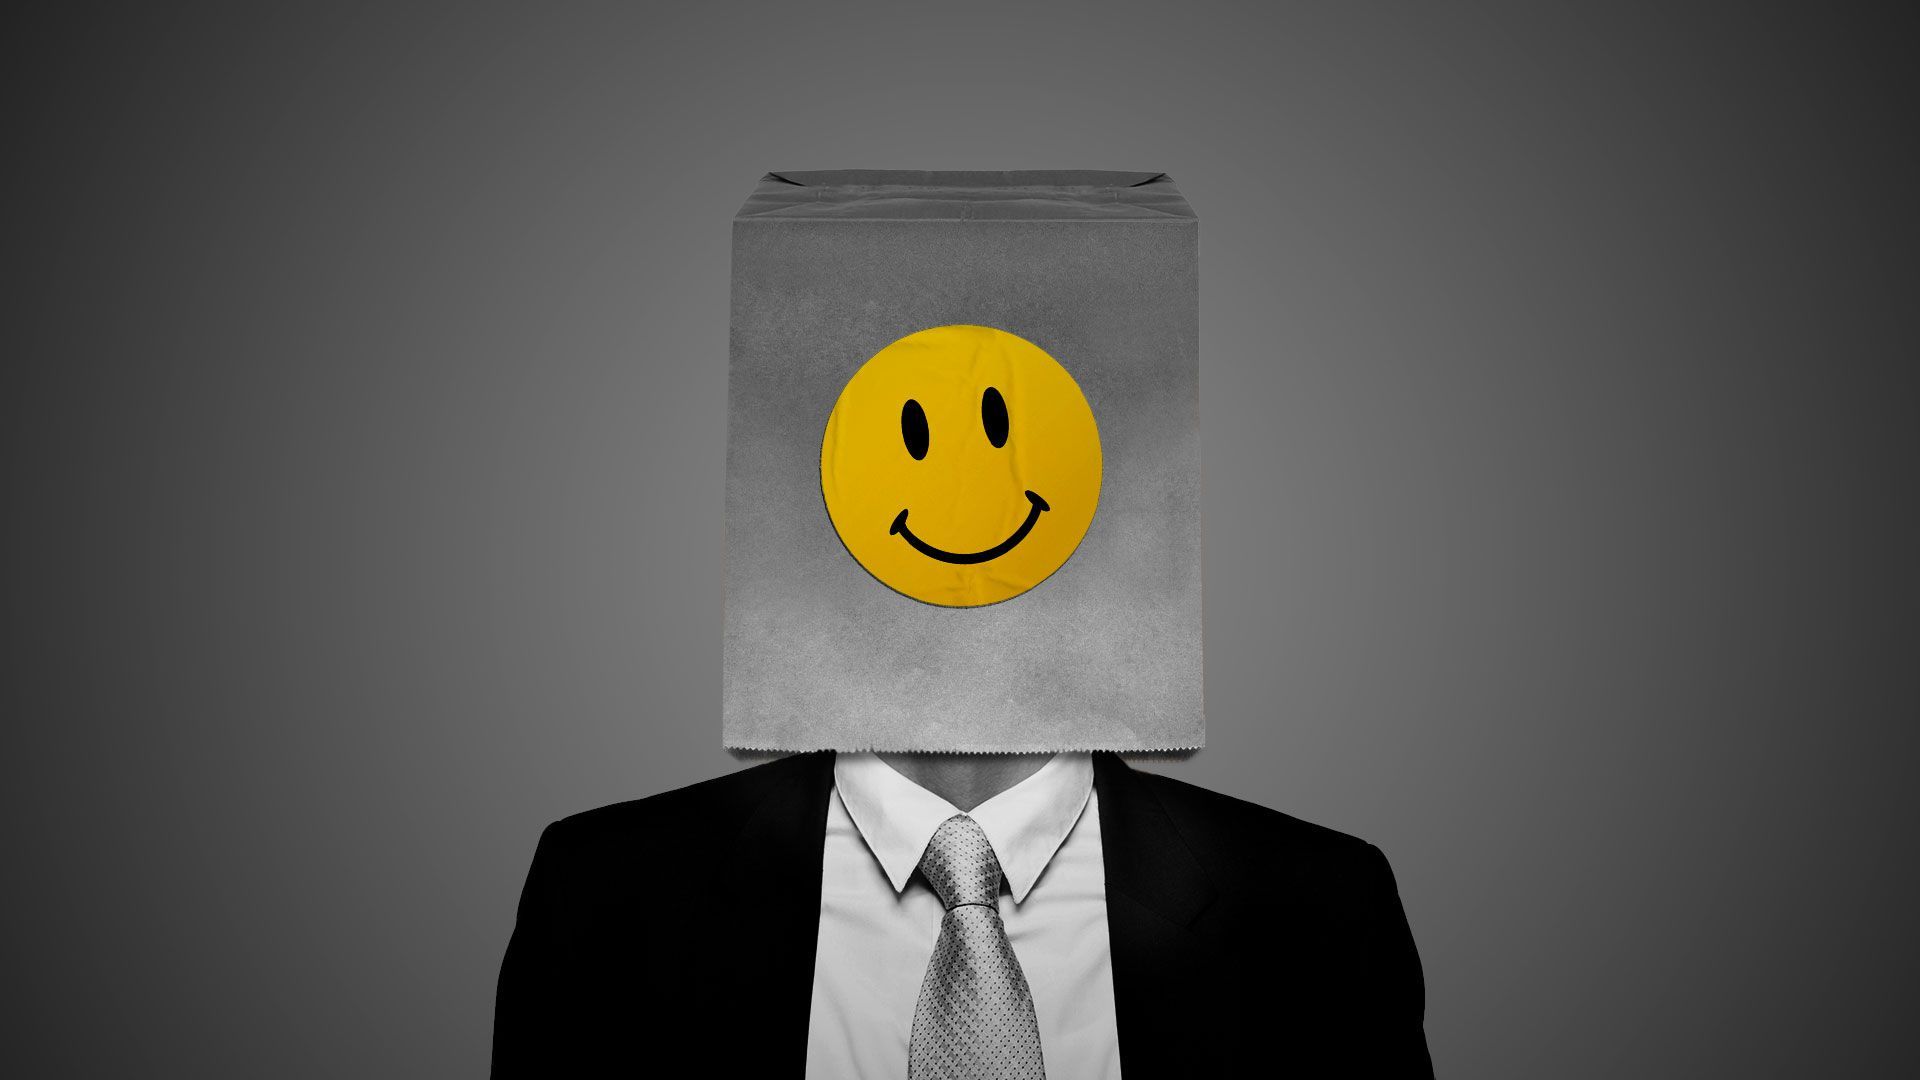 Illustration of a paper bag with a smiley face sticker over a business person's head.